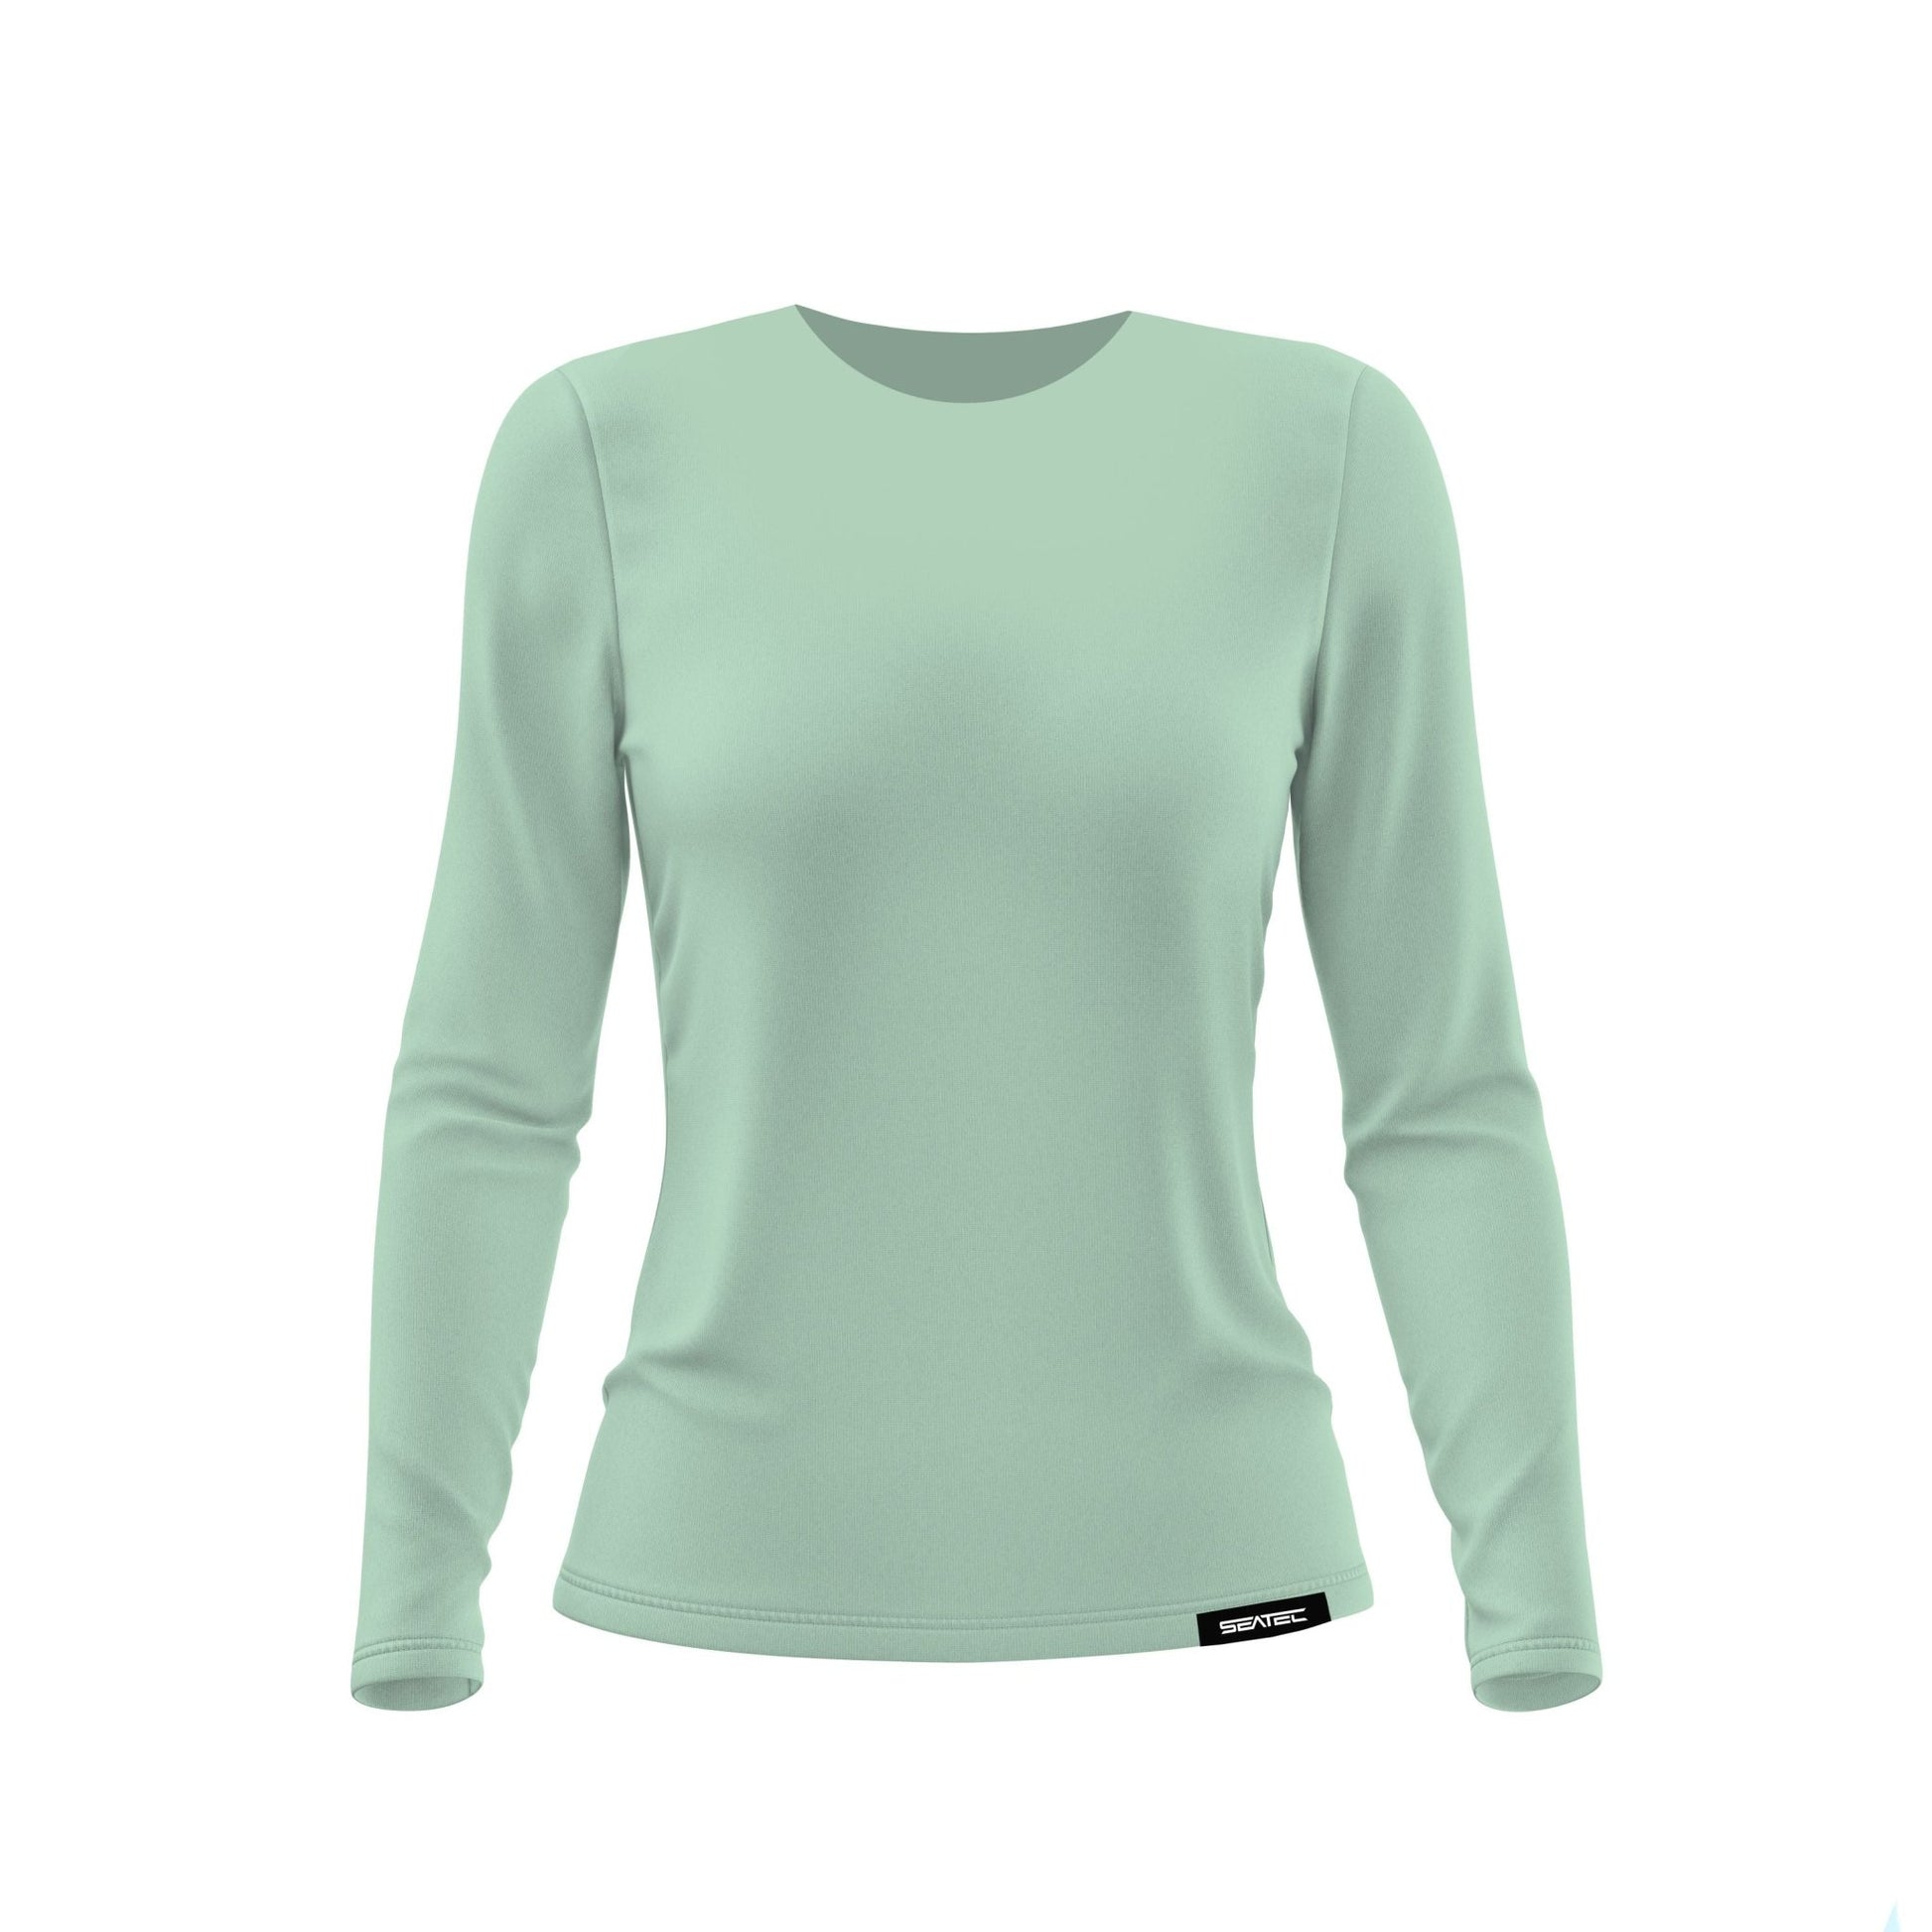 Seatec Outfitters | WOMEN'S ACTIVE | SEAFOAM | LS CREW - Angler's Pro Tackle & Outdoors